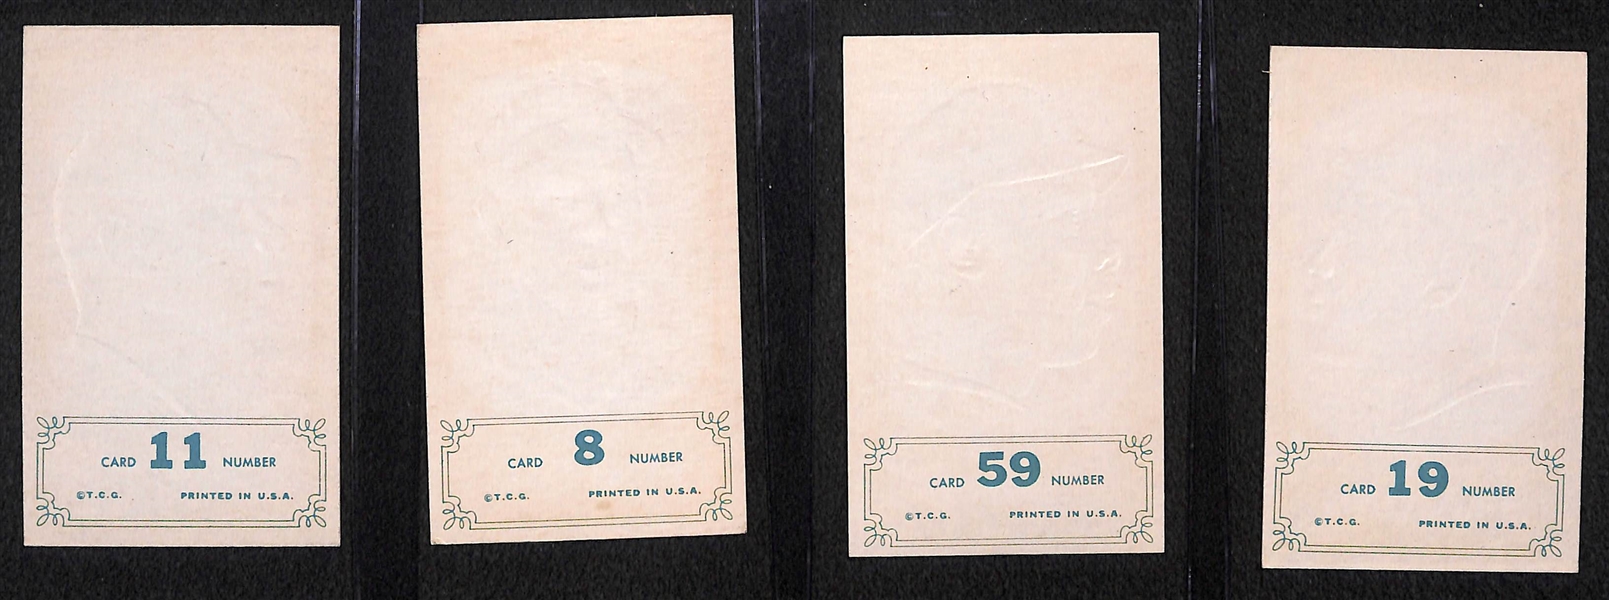 Mostly Pack-Fresh 1965 Topps Embossed Complete Set (All 72 Cards!) w. Mantle, Mays, Koufax, Aaron, Clemente